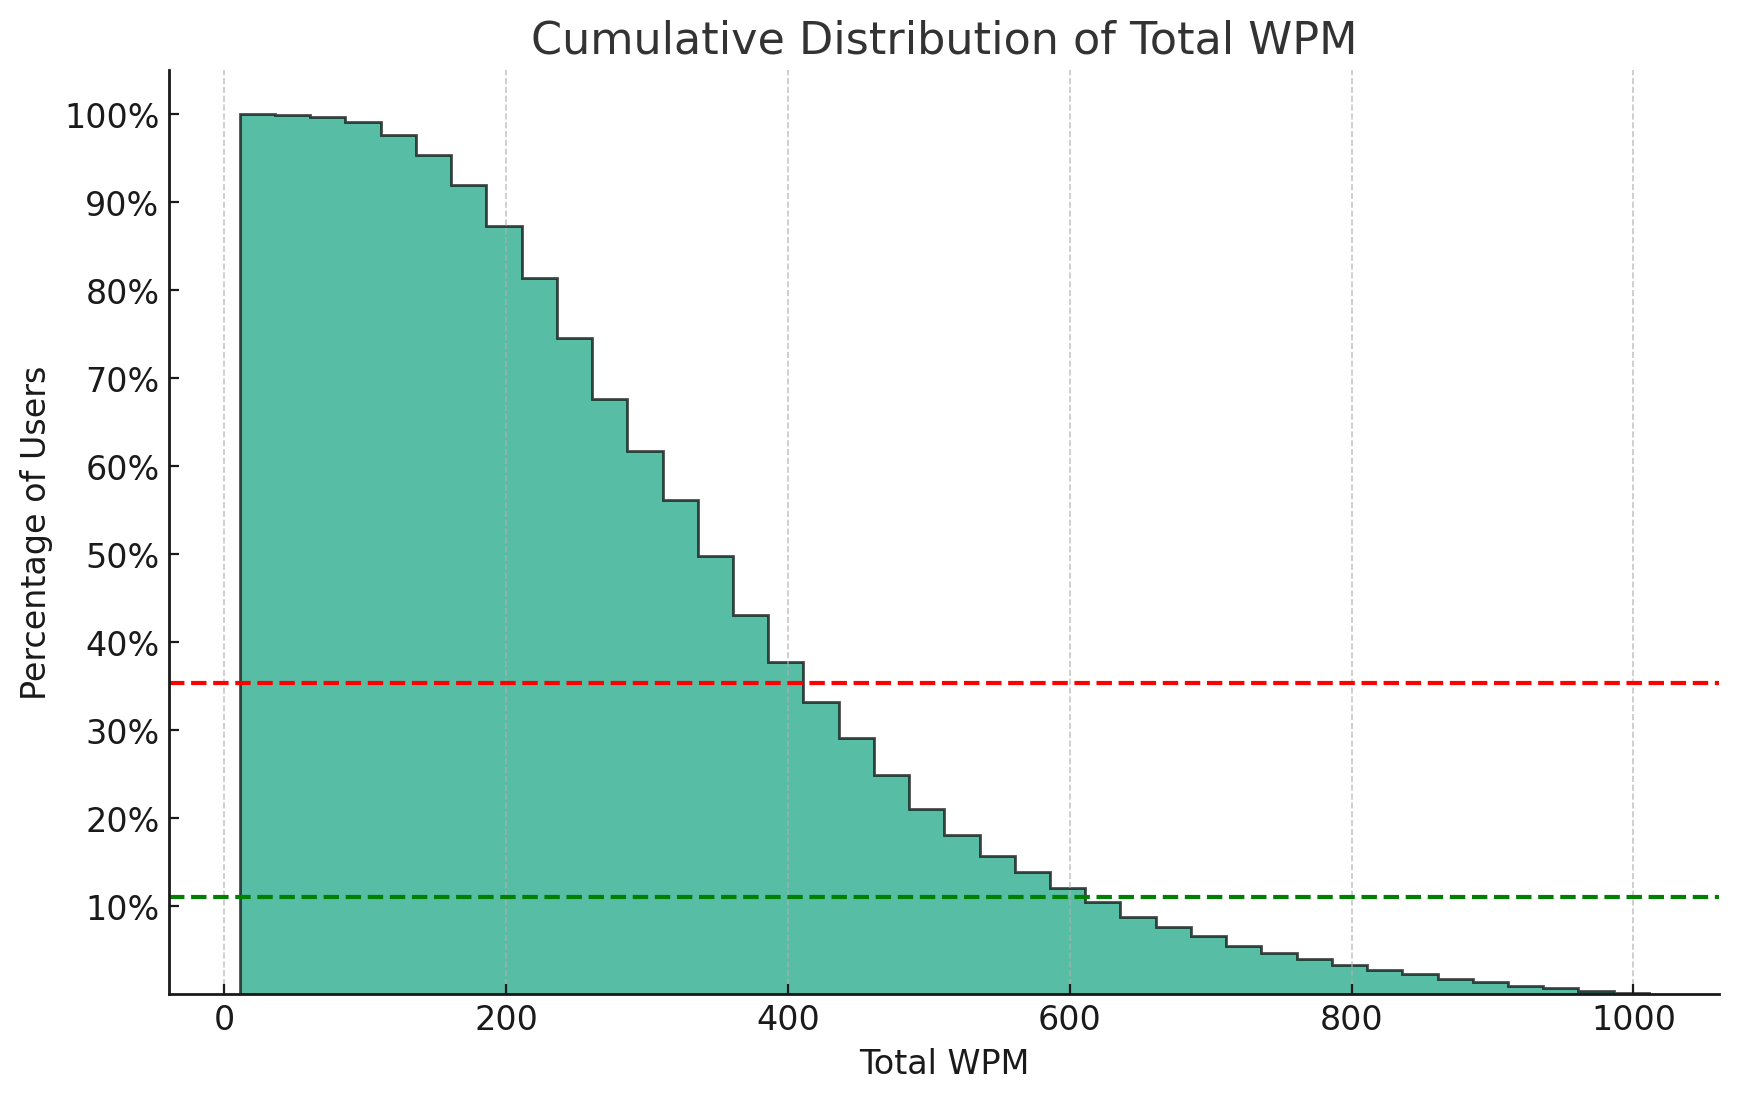 36% read faster than 400 WPM (red dashed line), 11% read faster than 600 WPM (green dashed line)